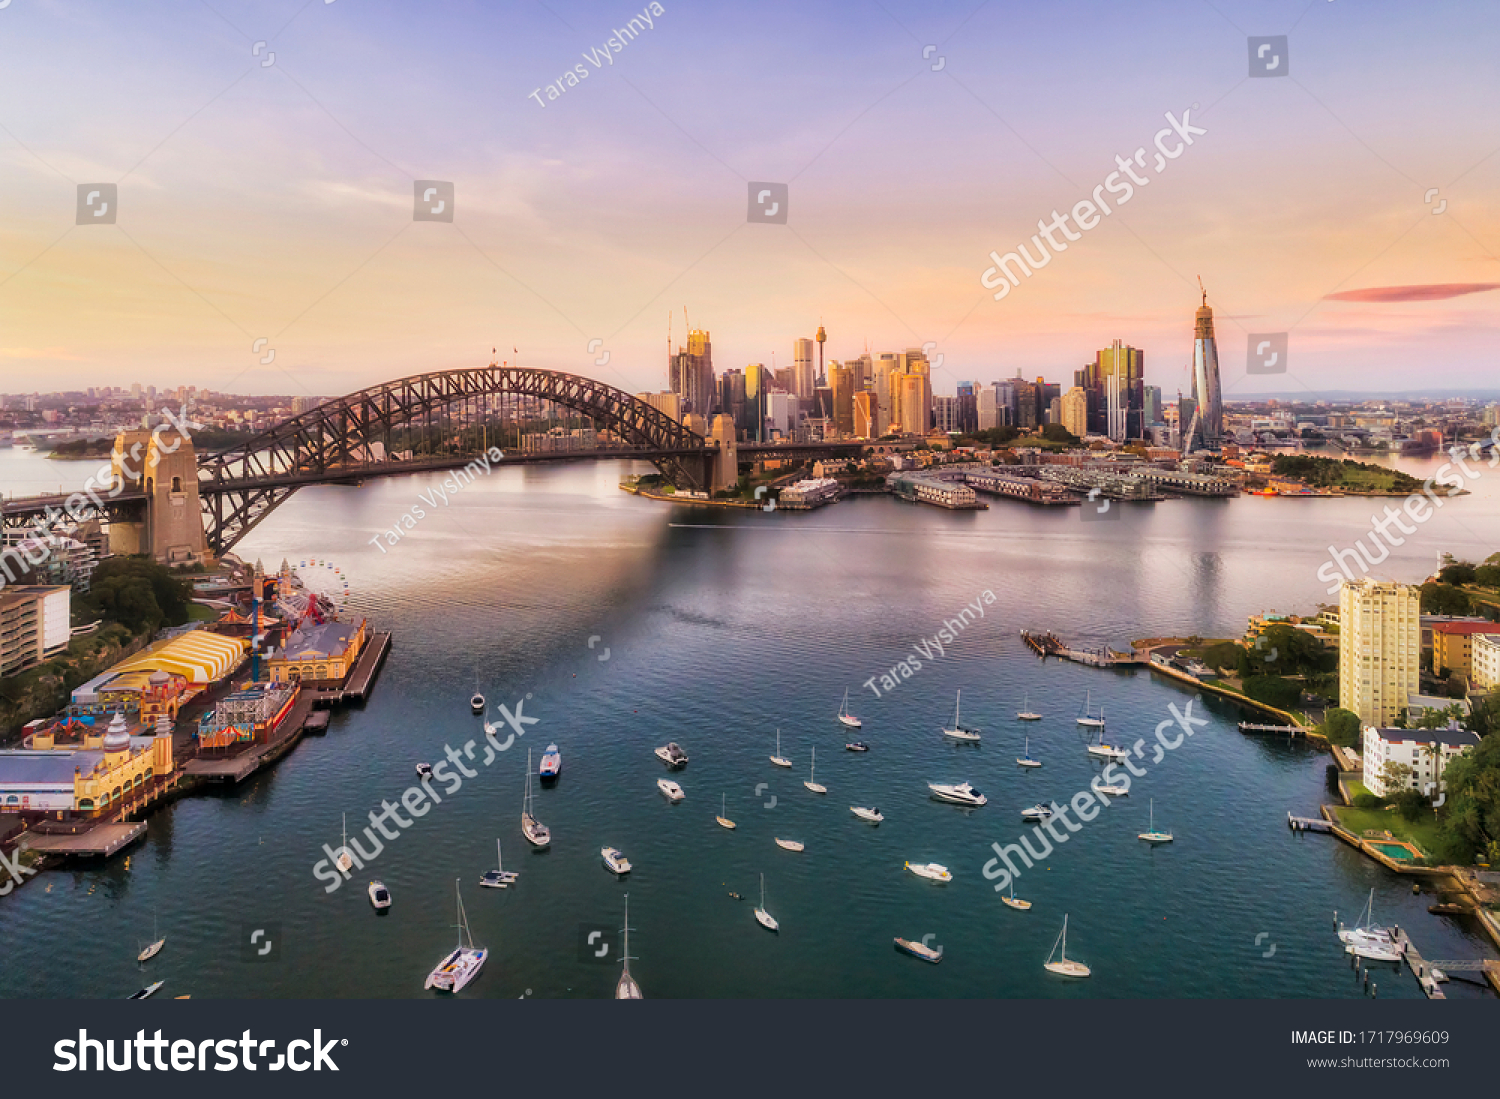 Sunrise in Sydney city - aerial view from Lavender bay to the Sydney harbour bridge and CBD skyline. #1717969609